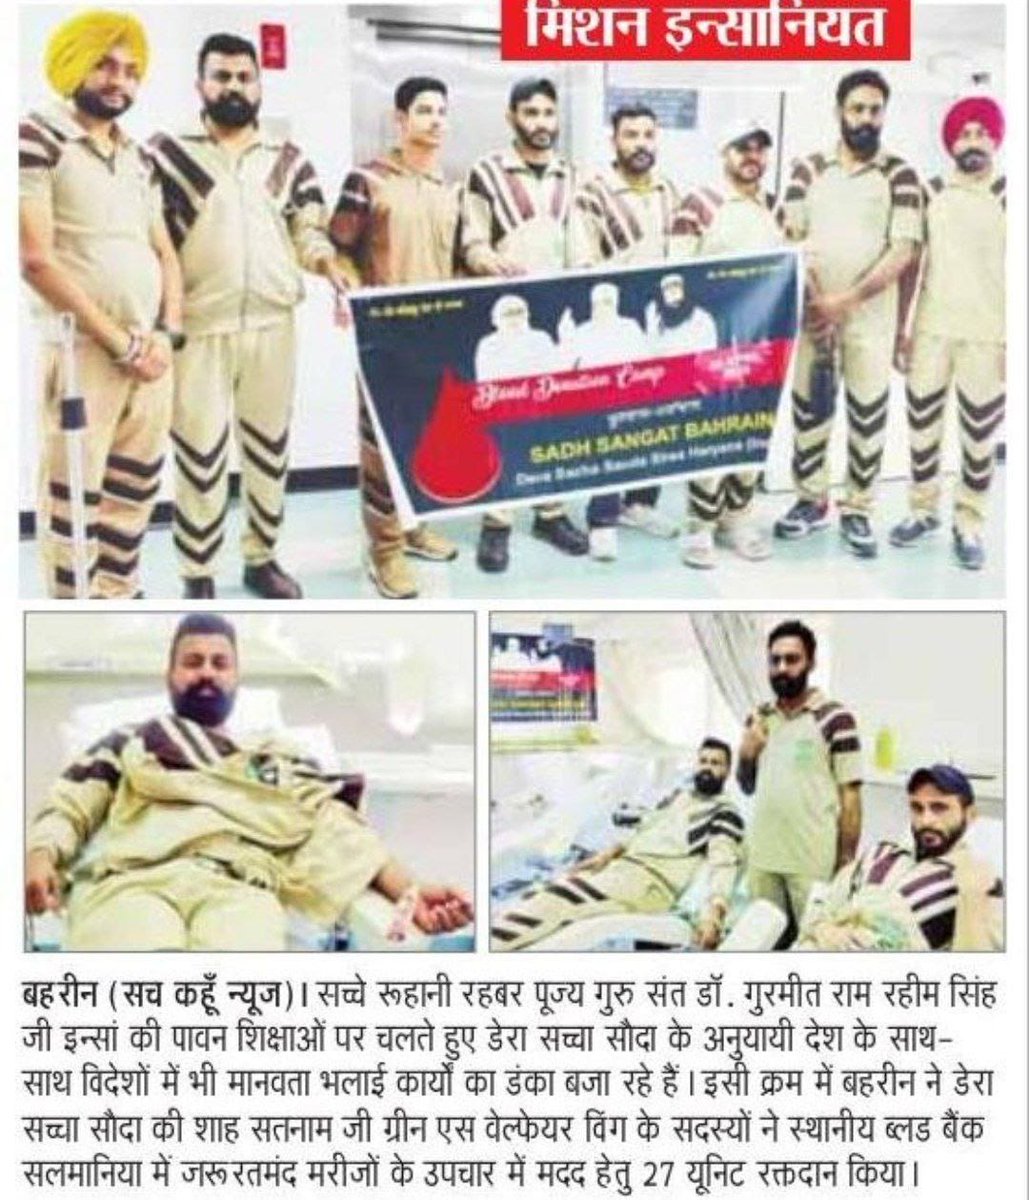 Blood Donation is biggest act of charity.#BeALifeSaver by donating blood.

Dera Sacha Sauda followers are trueB blood pump as they have made it habit to donate blood on occasions worthy of celebrations like birthdays.

All this happen due to grace of Ram Rahim.